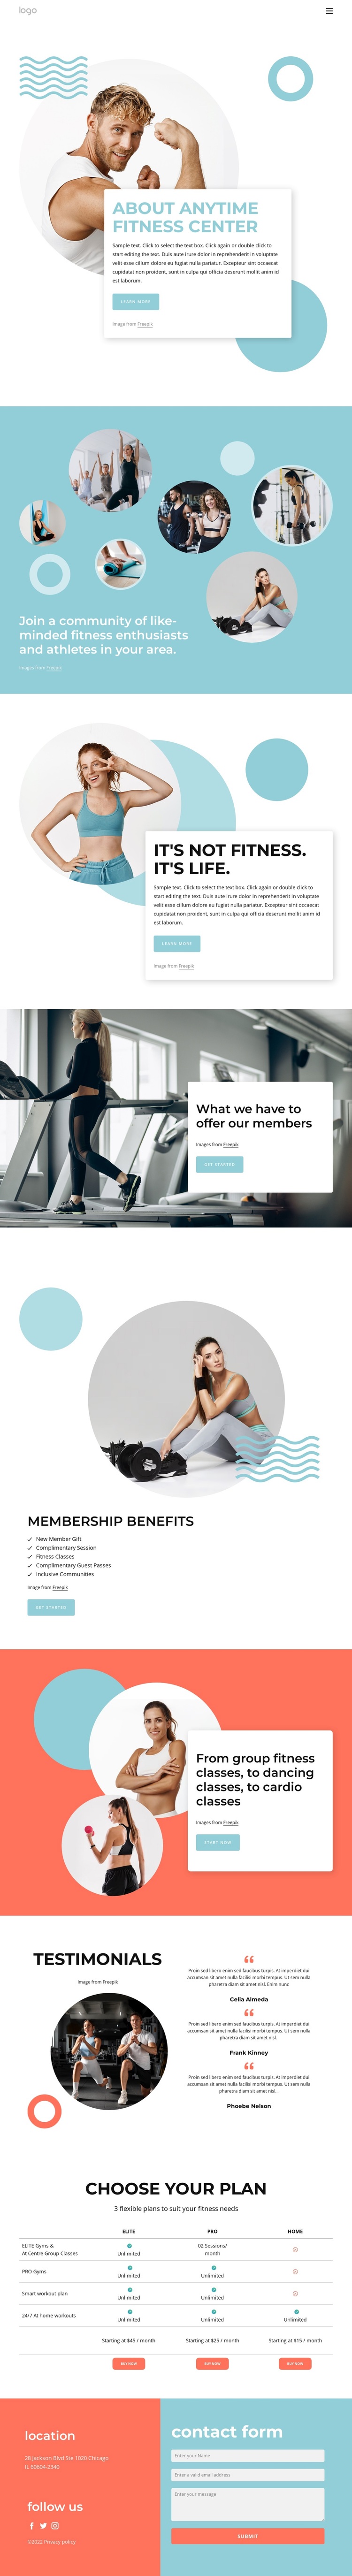 About Anytime fitness center Joomla Page Builder